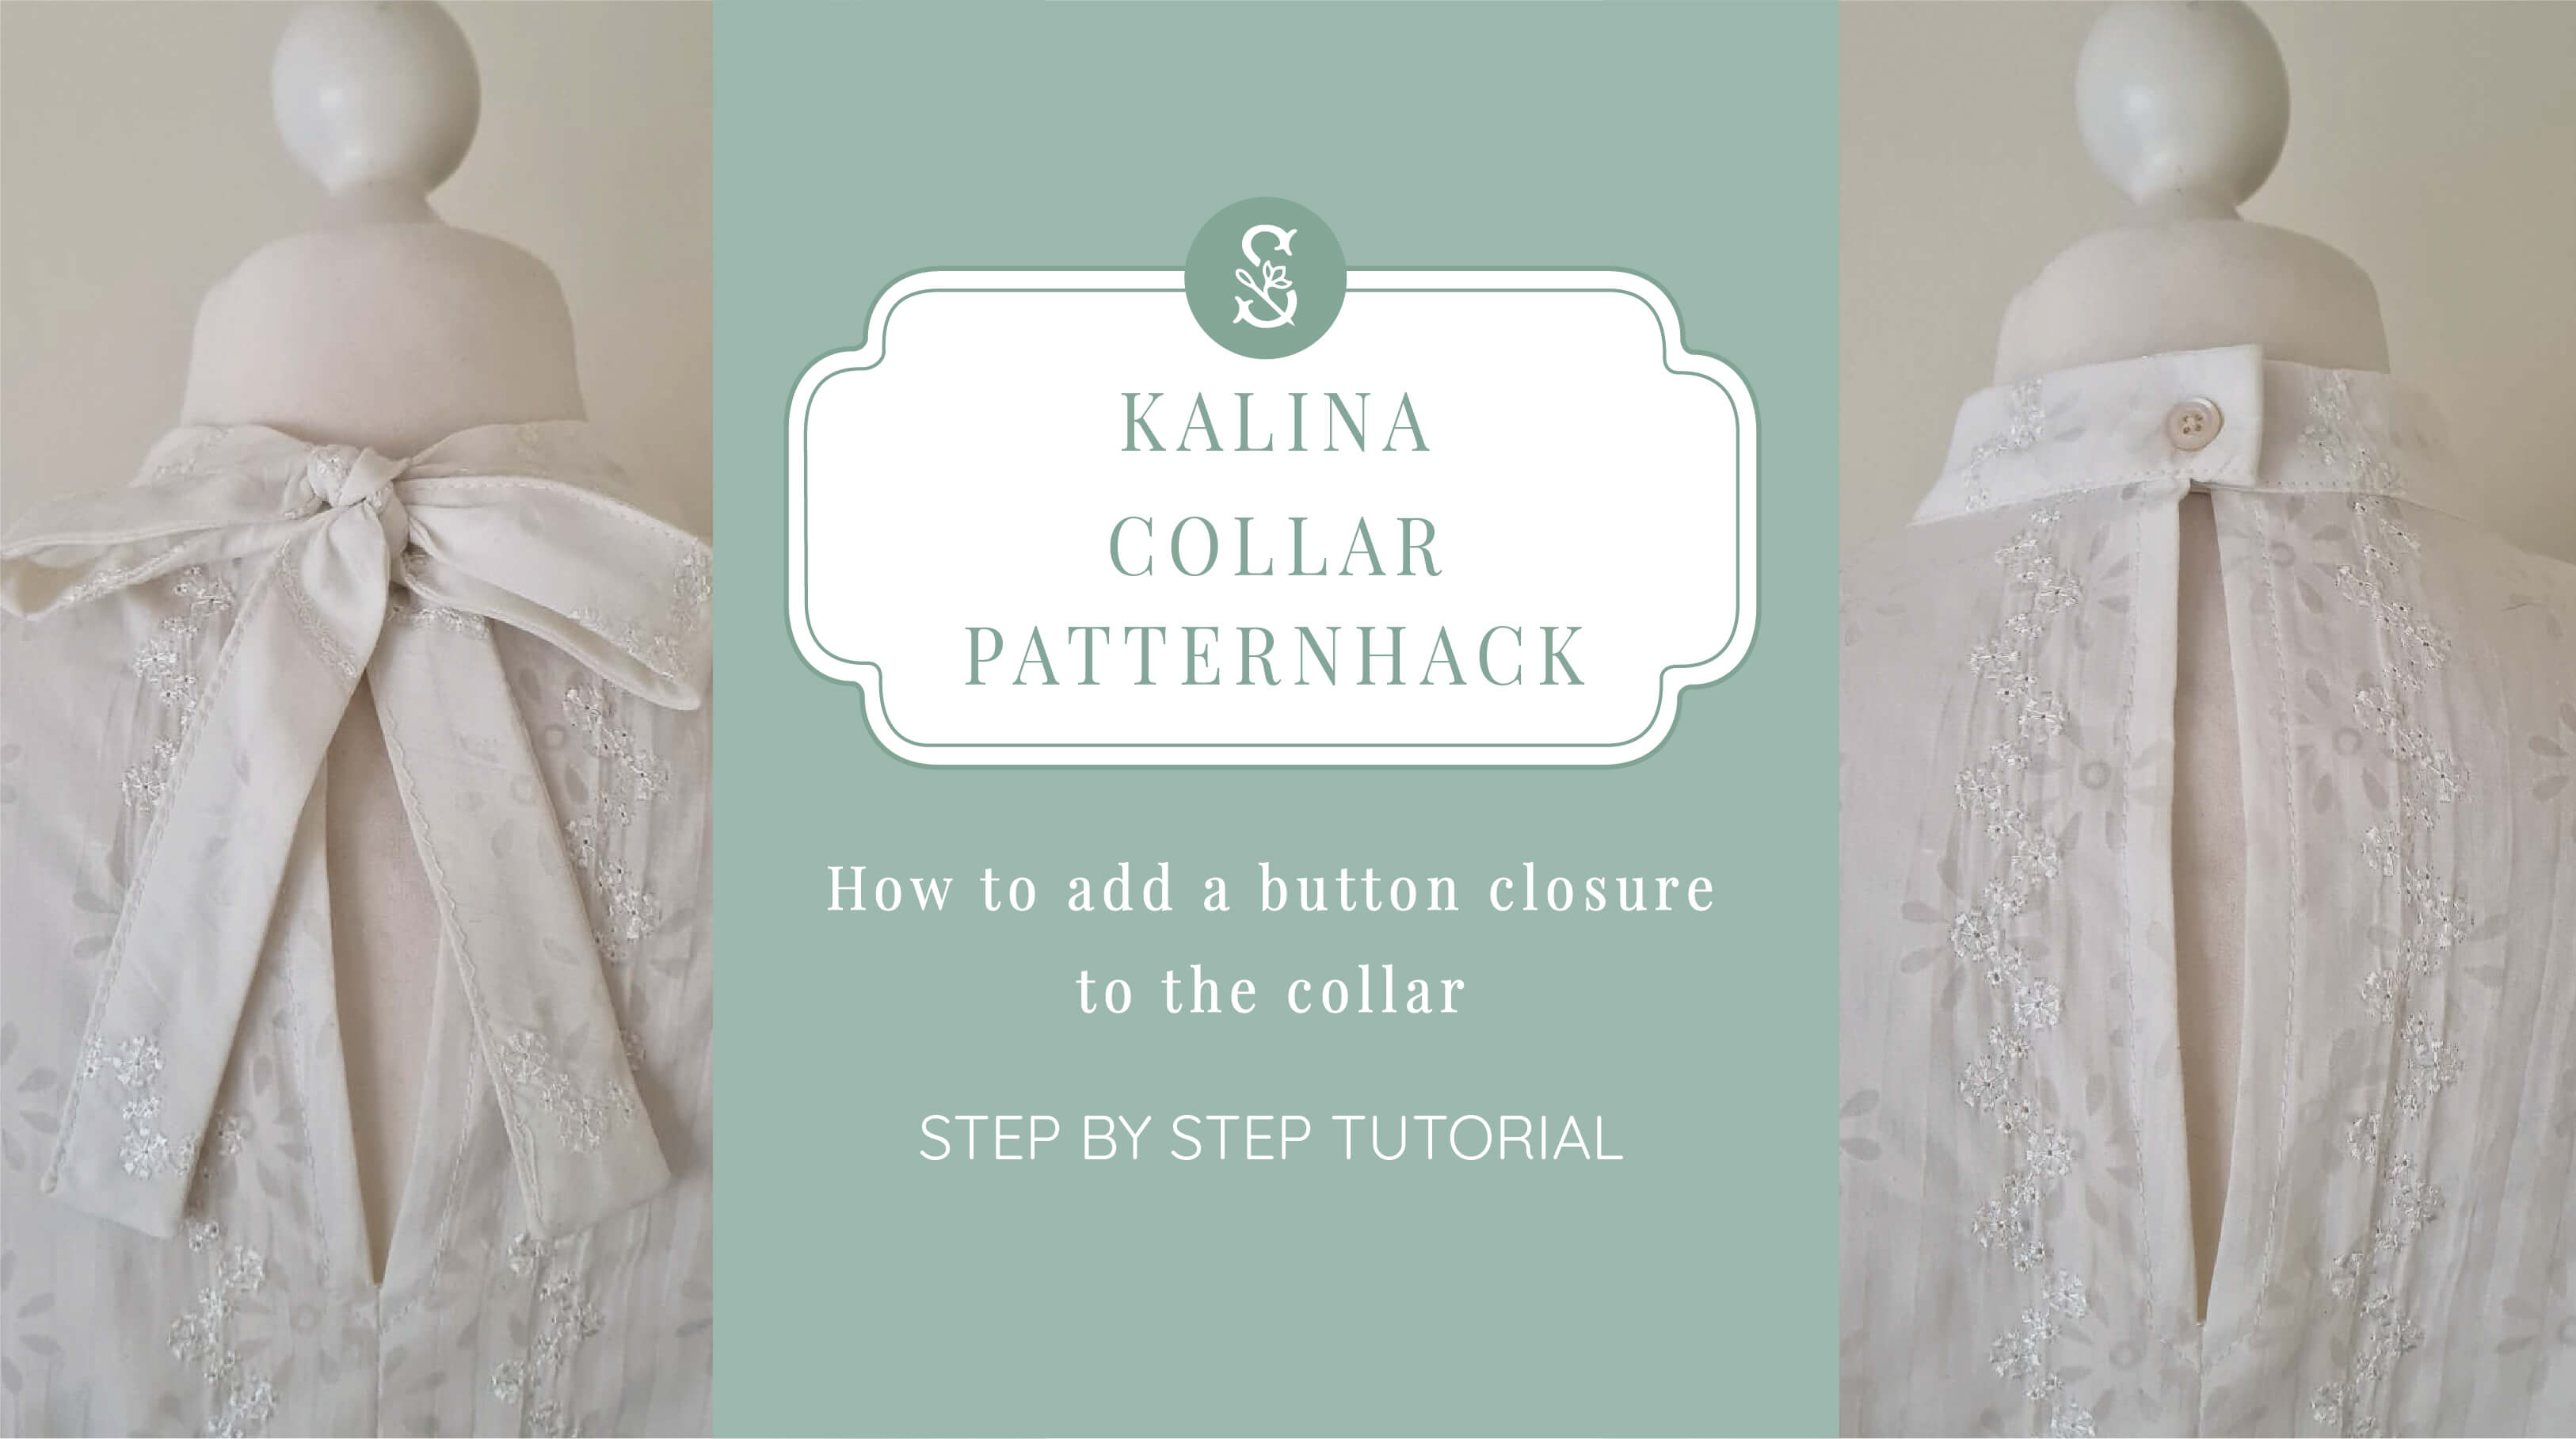 Kalina Patternhack: How to add a button closure to the collar